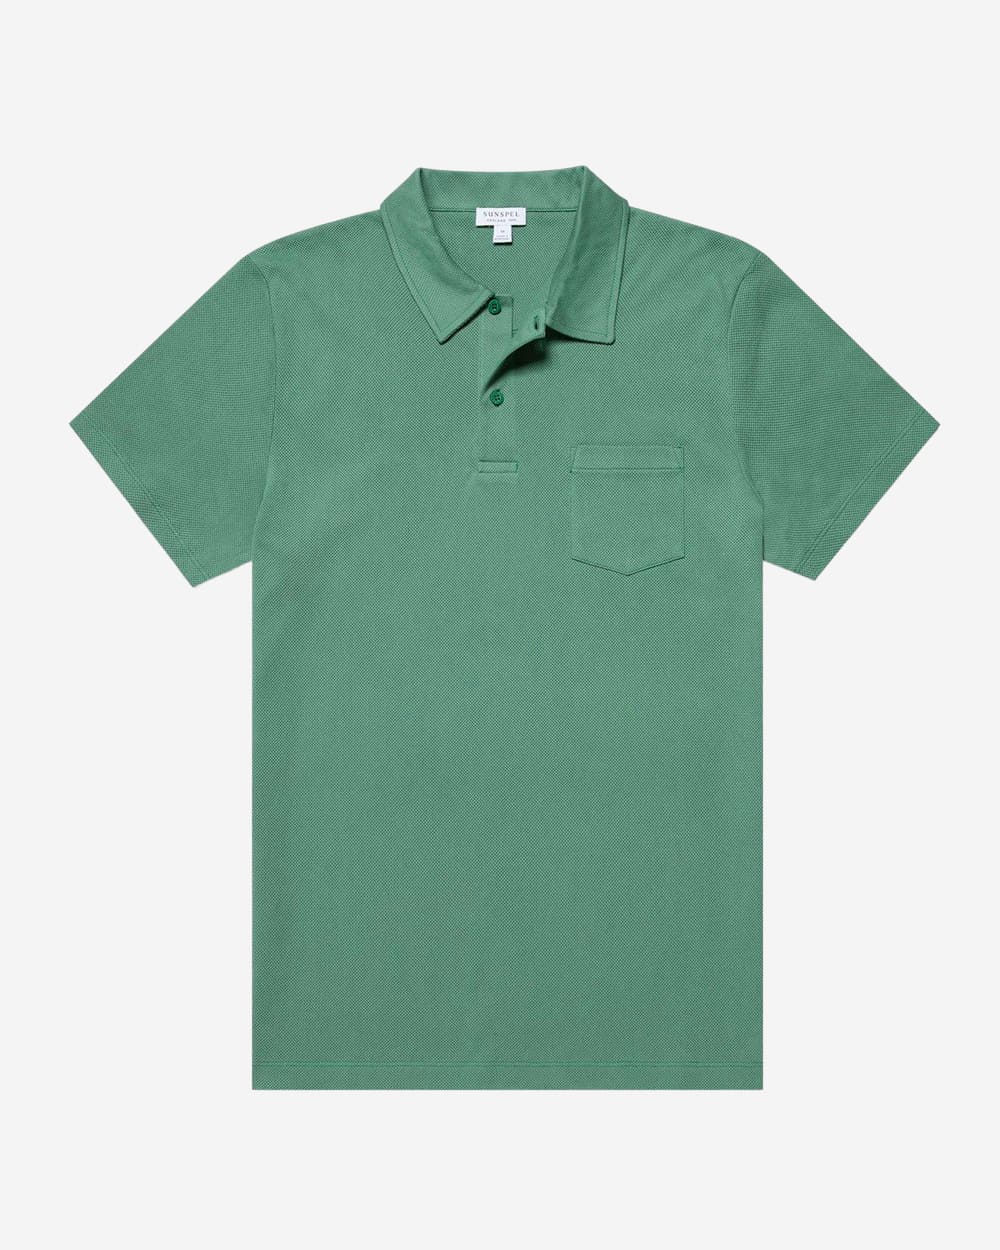 20 Luxury Polo Shirt Brands That Are Worth The Money (2023)